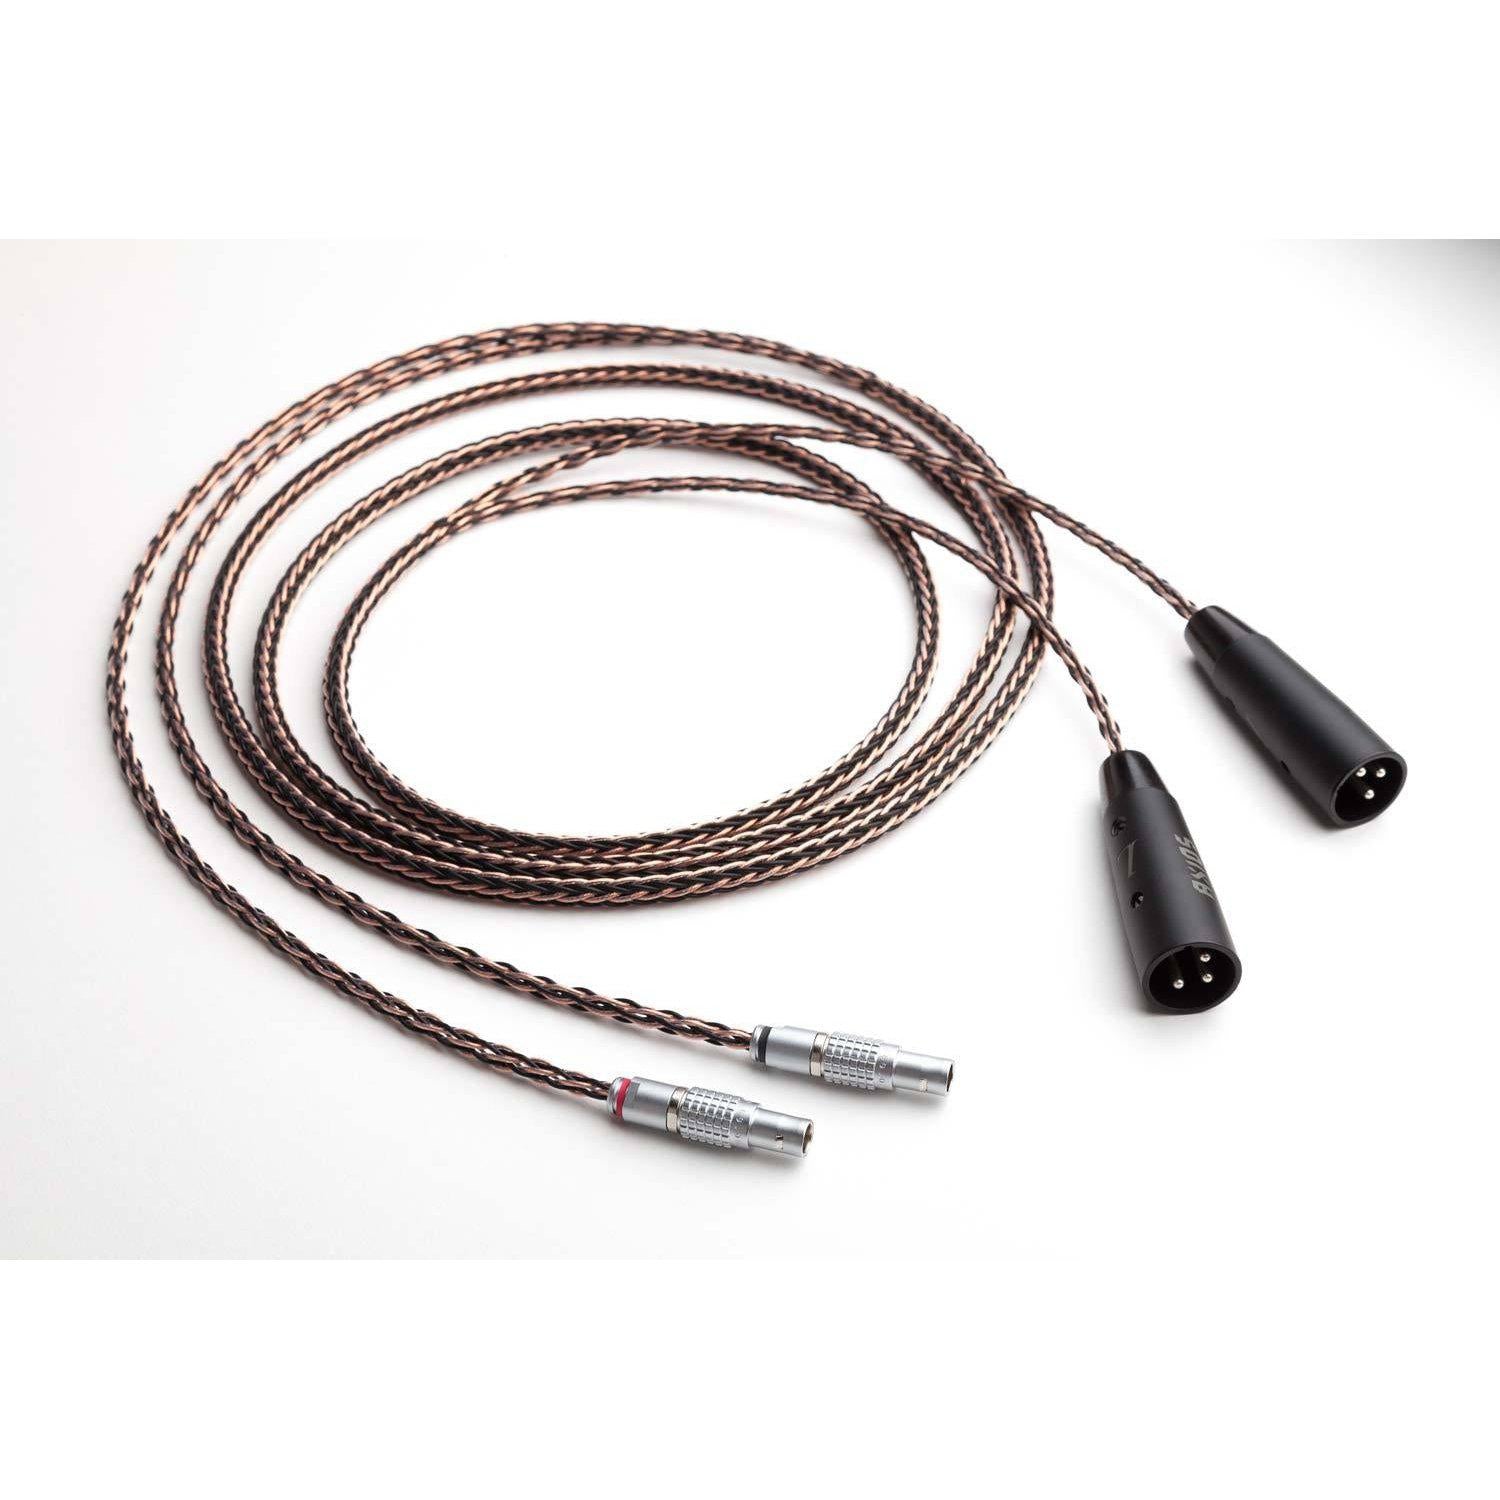 Kimber Kable Axios Copper Headphone Cable